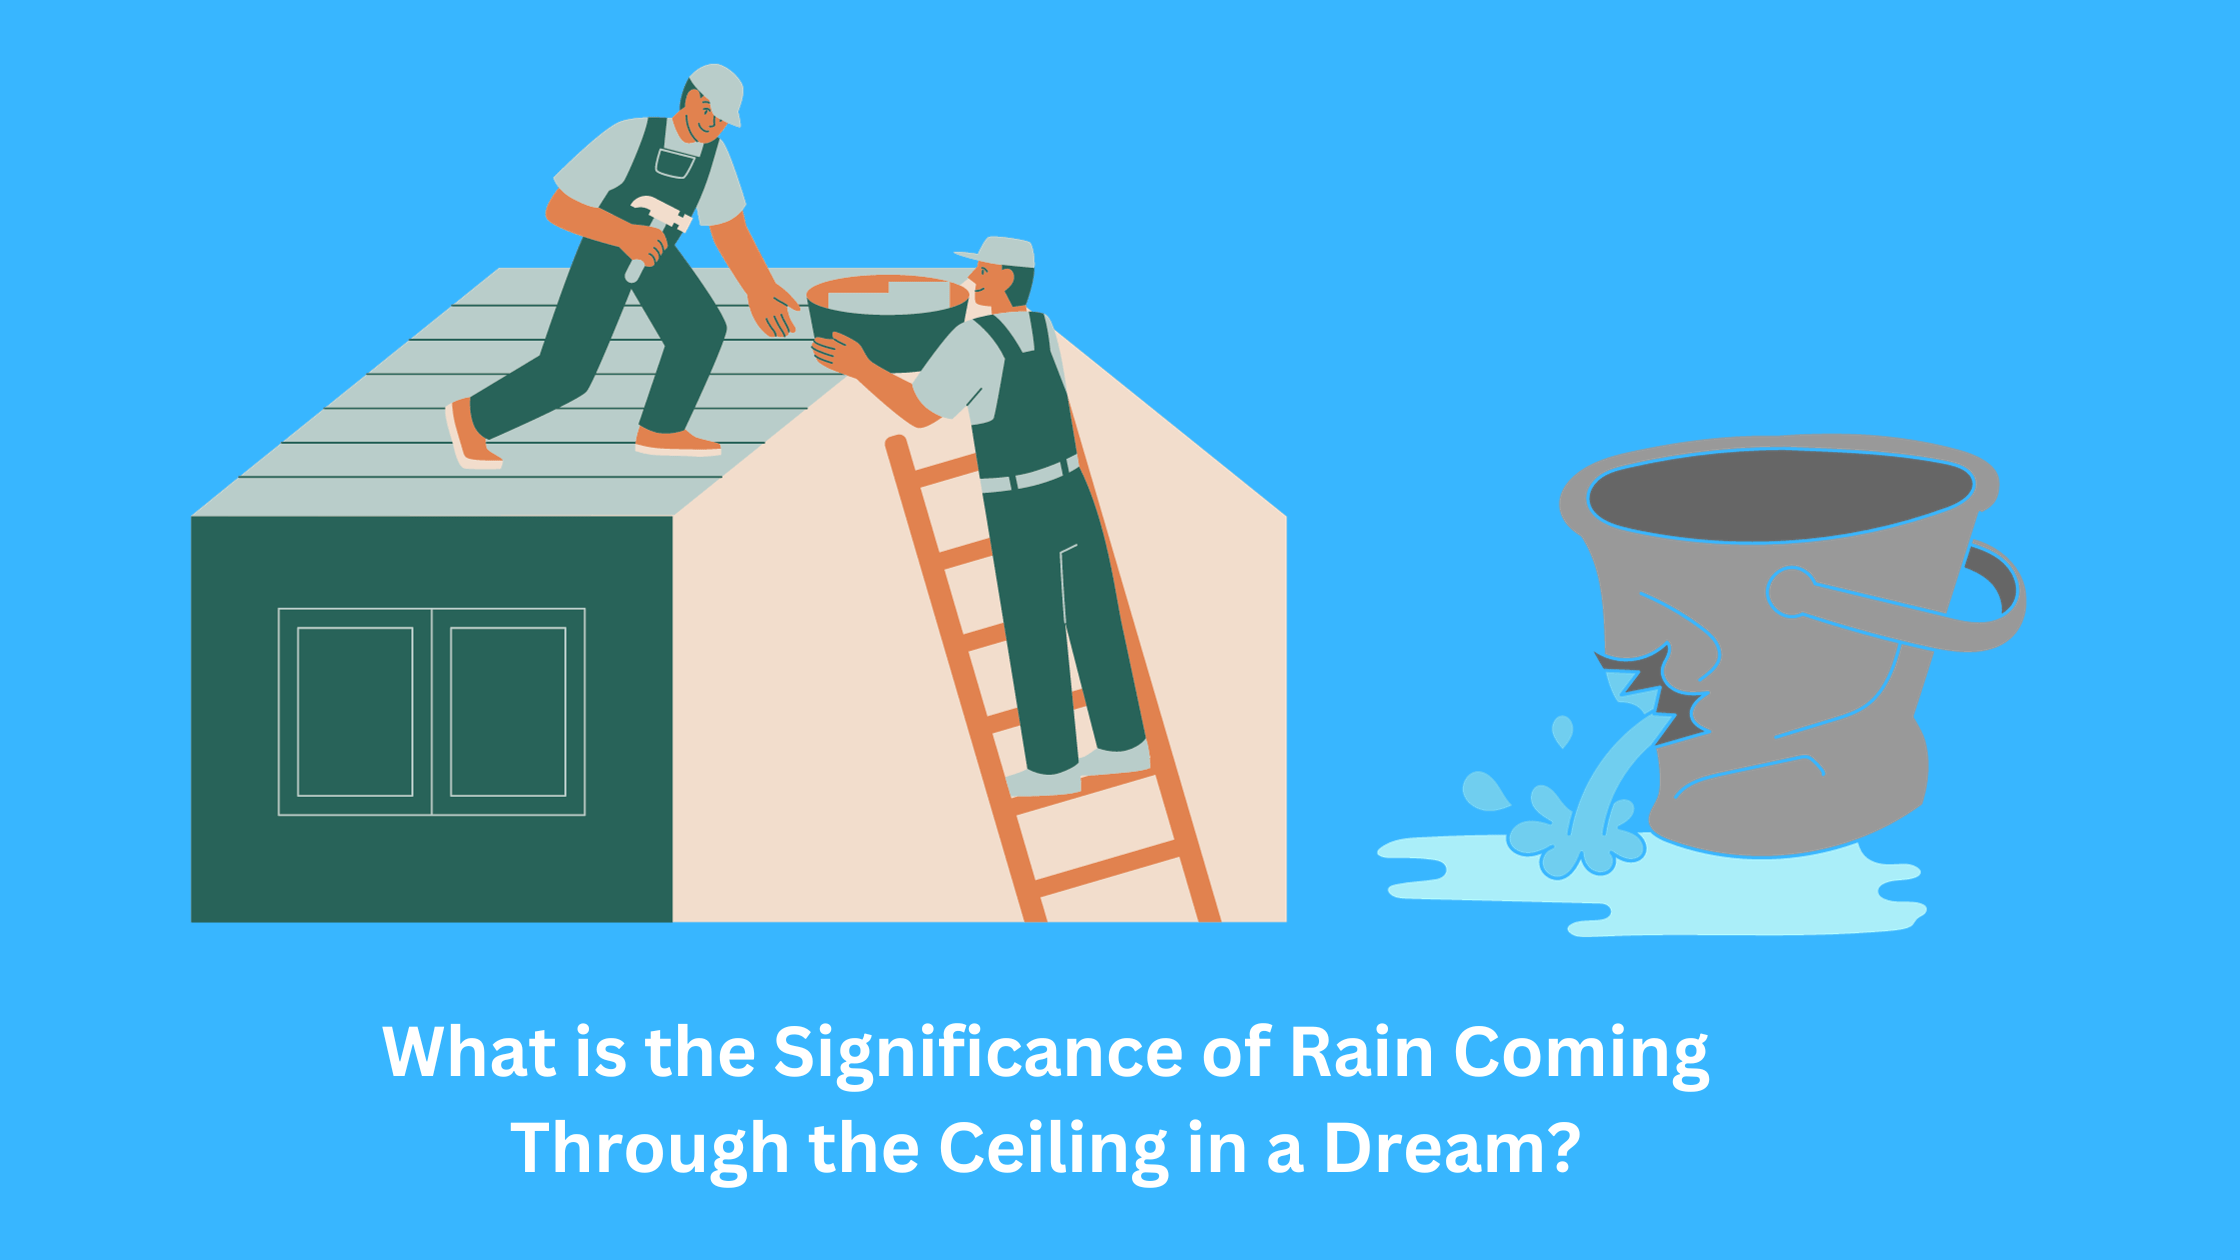 What is the Significance of Rain Coming Through the Ceiling in a Dream